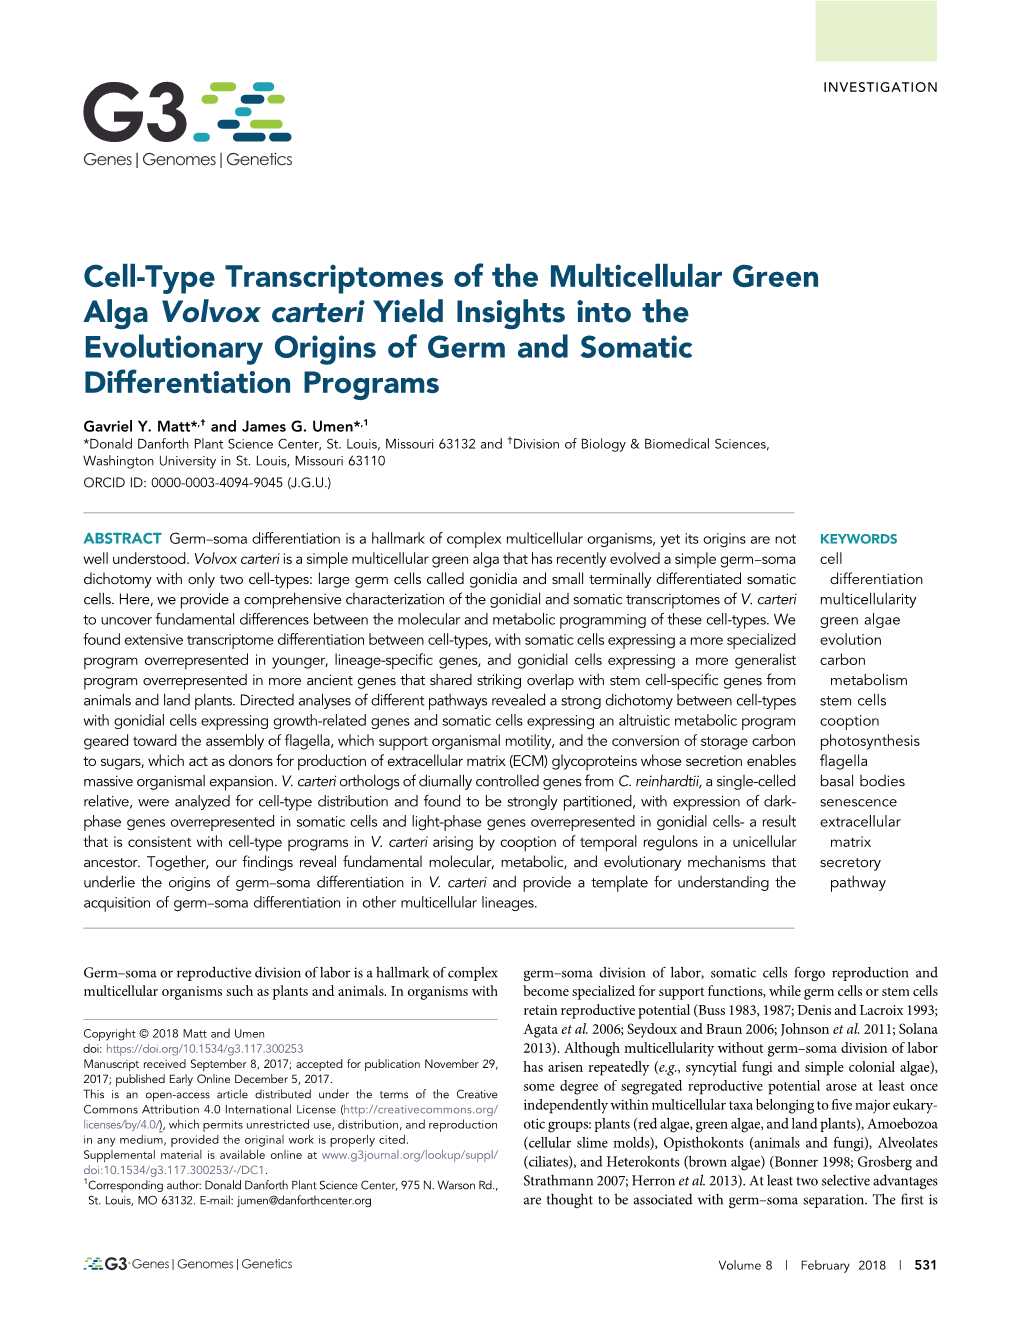 Cell-Type Transcriptomes of the Multicellular Green Alga Volvox Carteri Yield Insights Into the Evolutionary Origins of Germ and Somatic Differentiation Programs